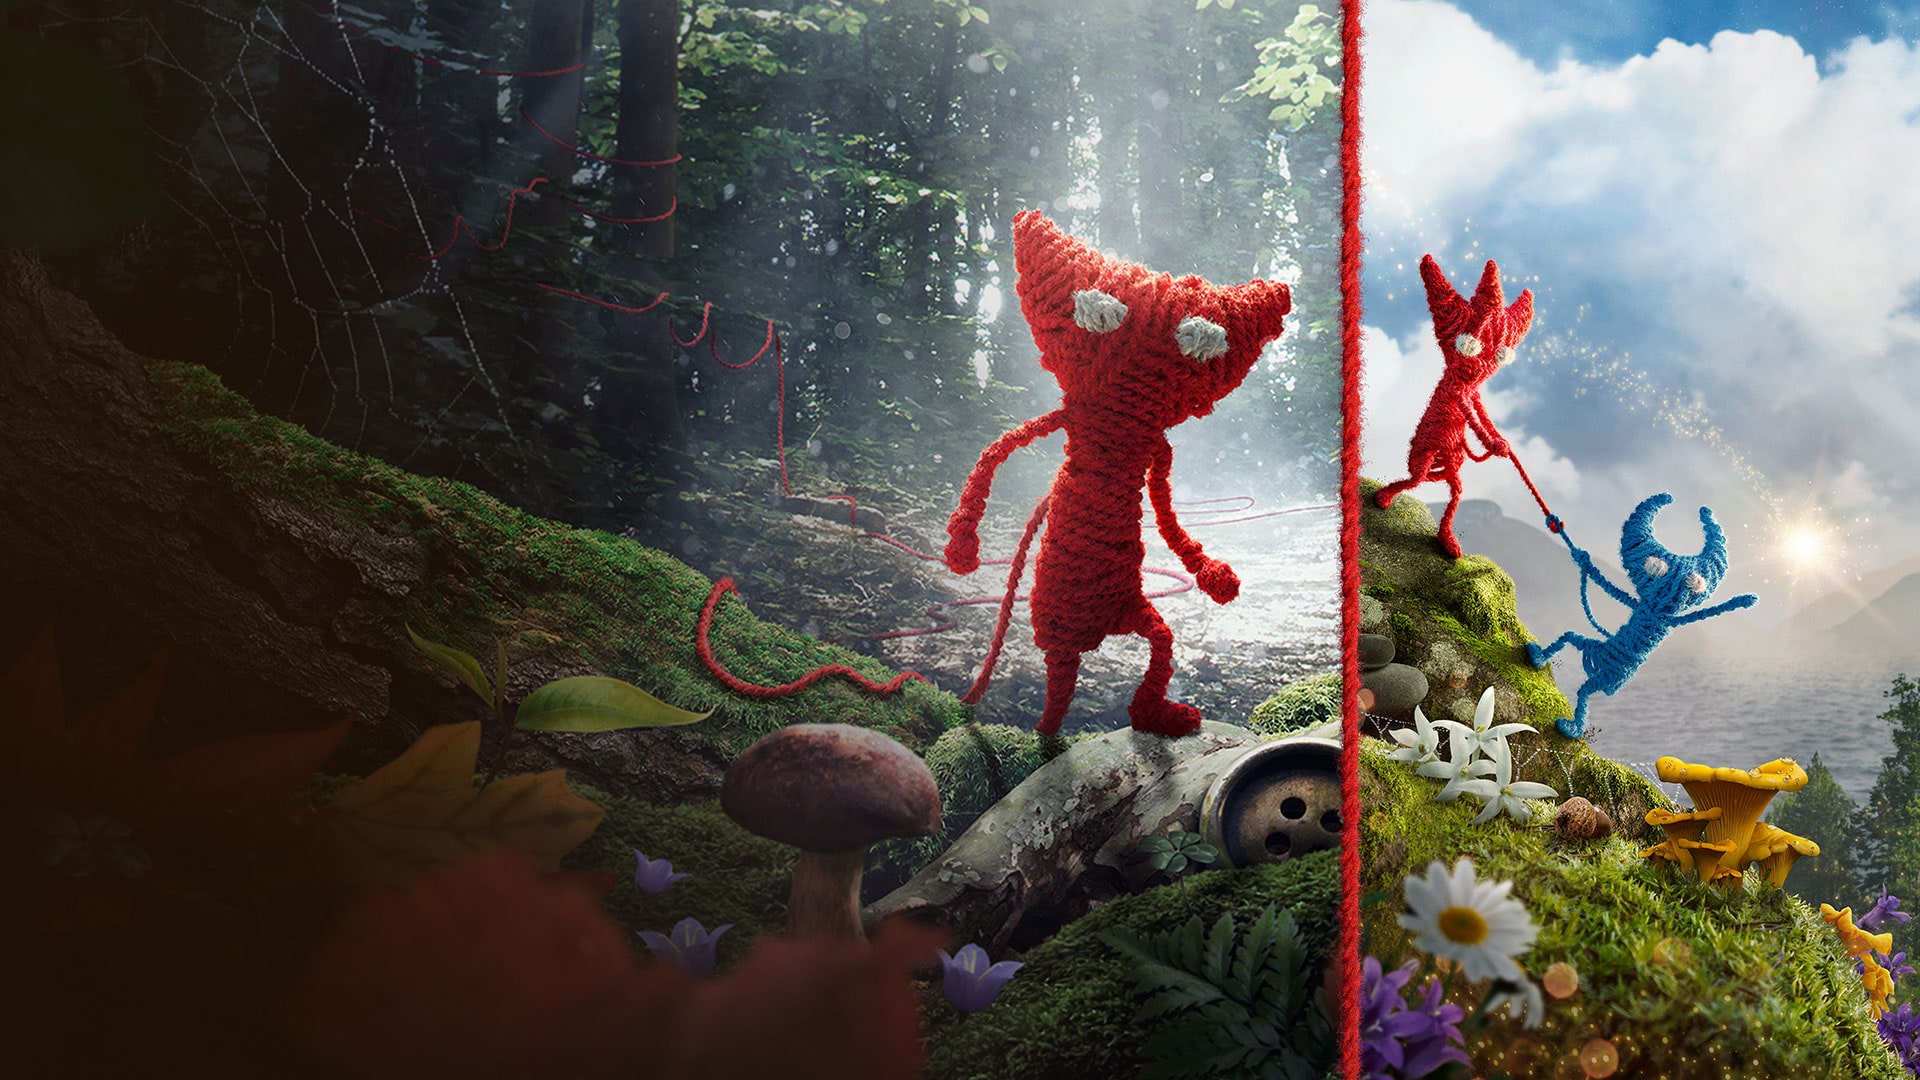 unravel 2 ps store